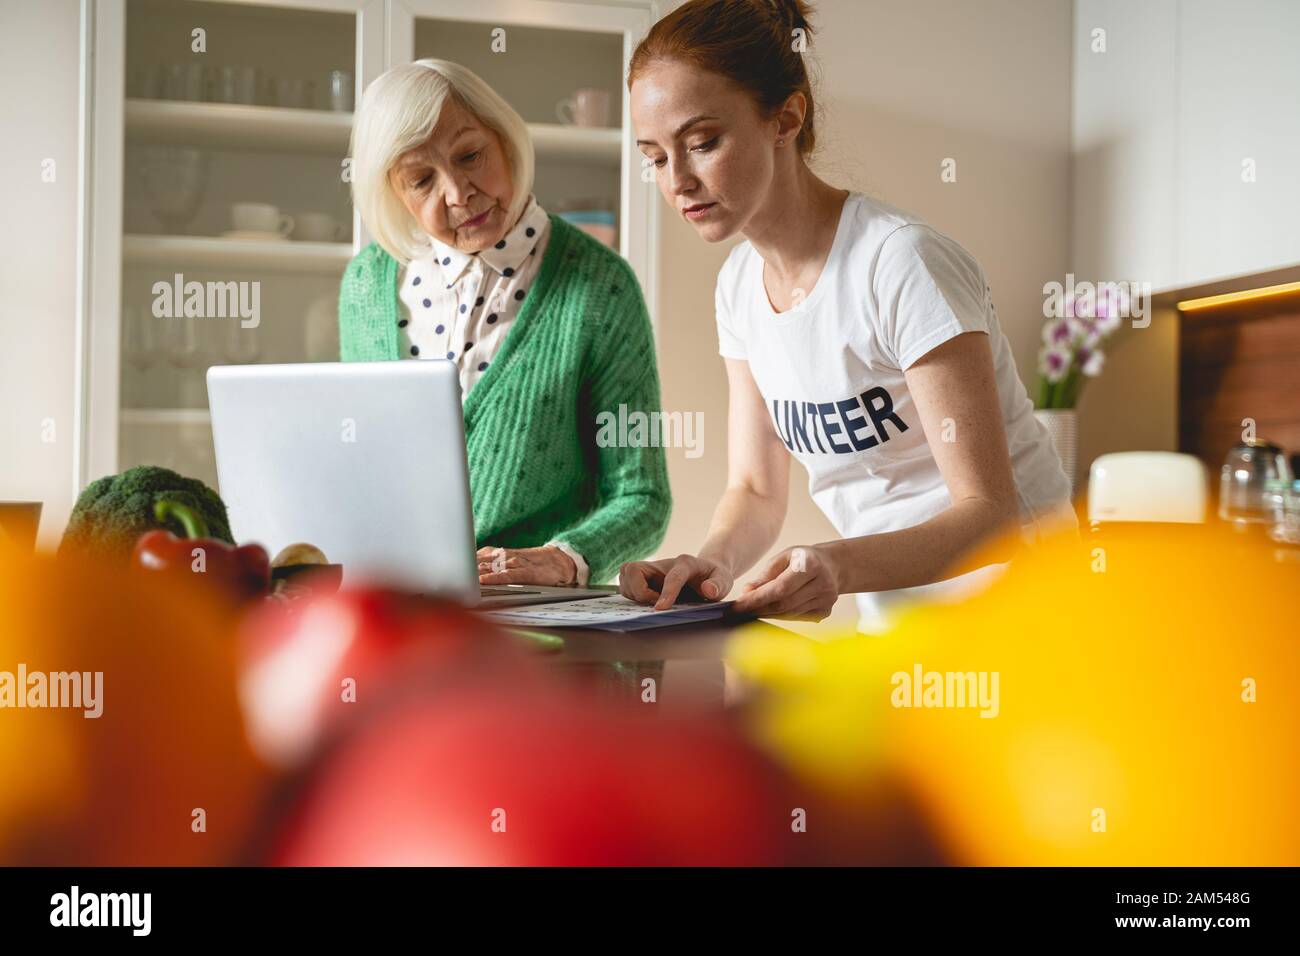 Two females leaning on table while using laptop Stock Photo